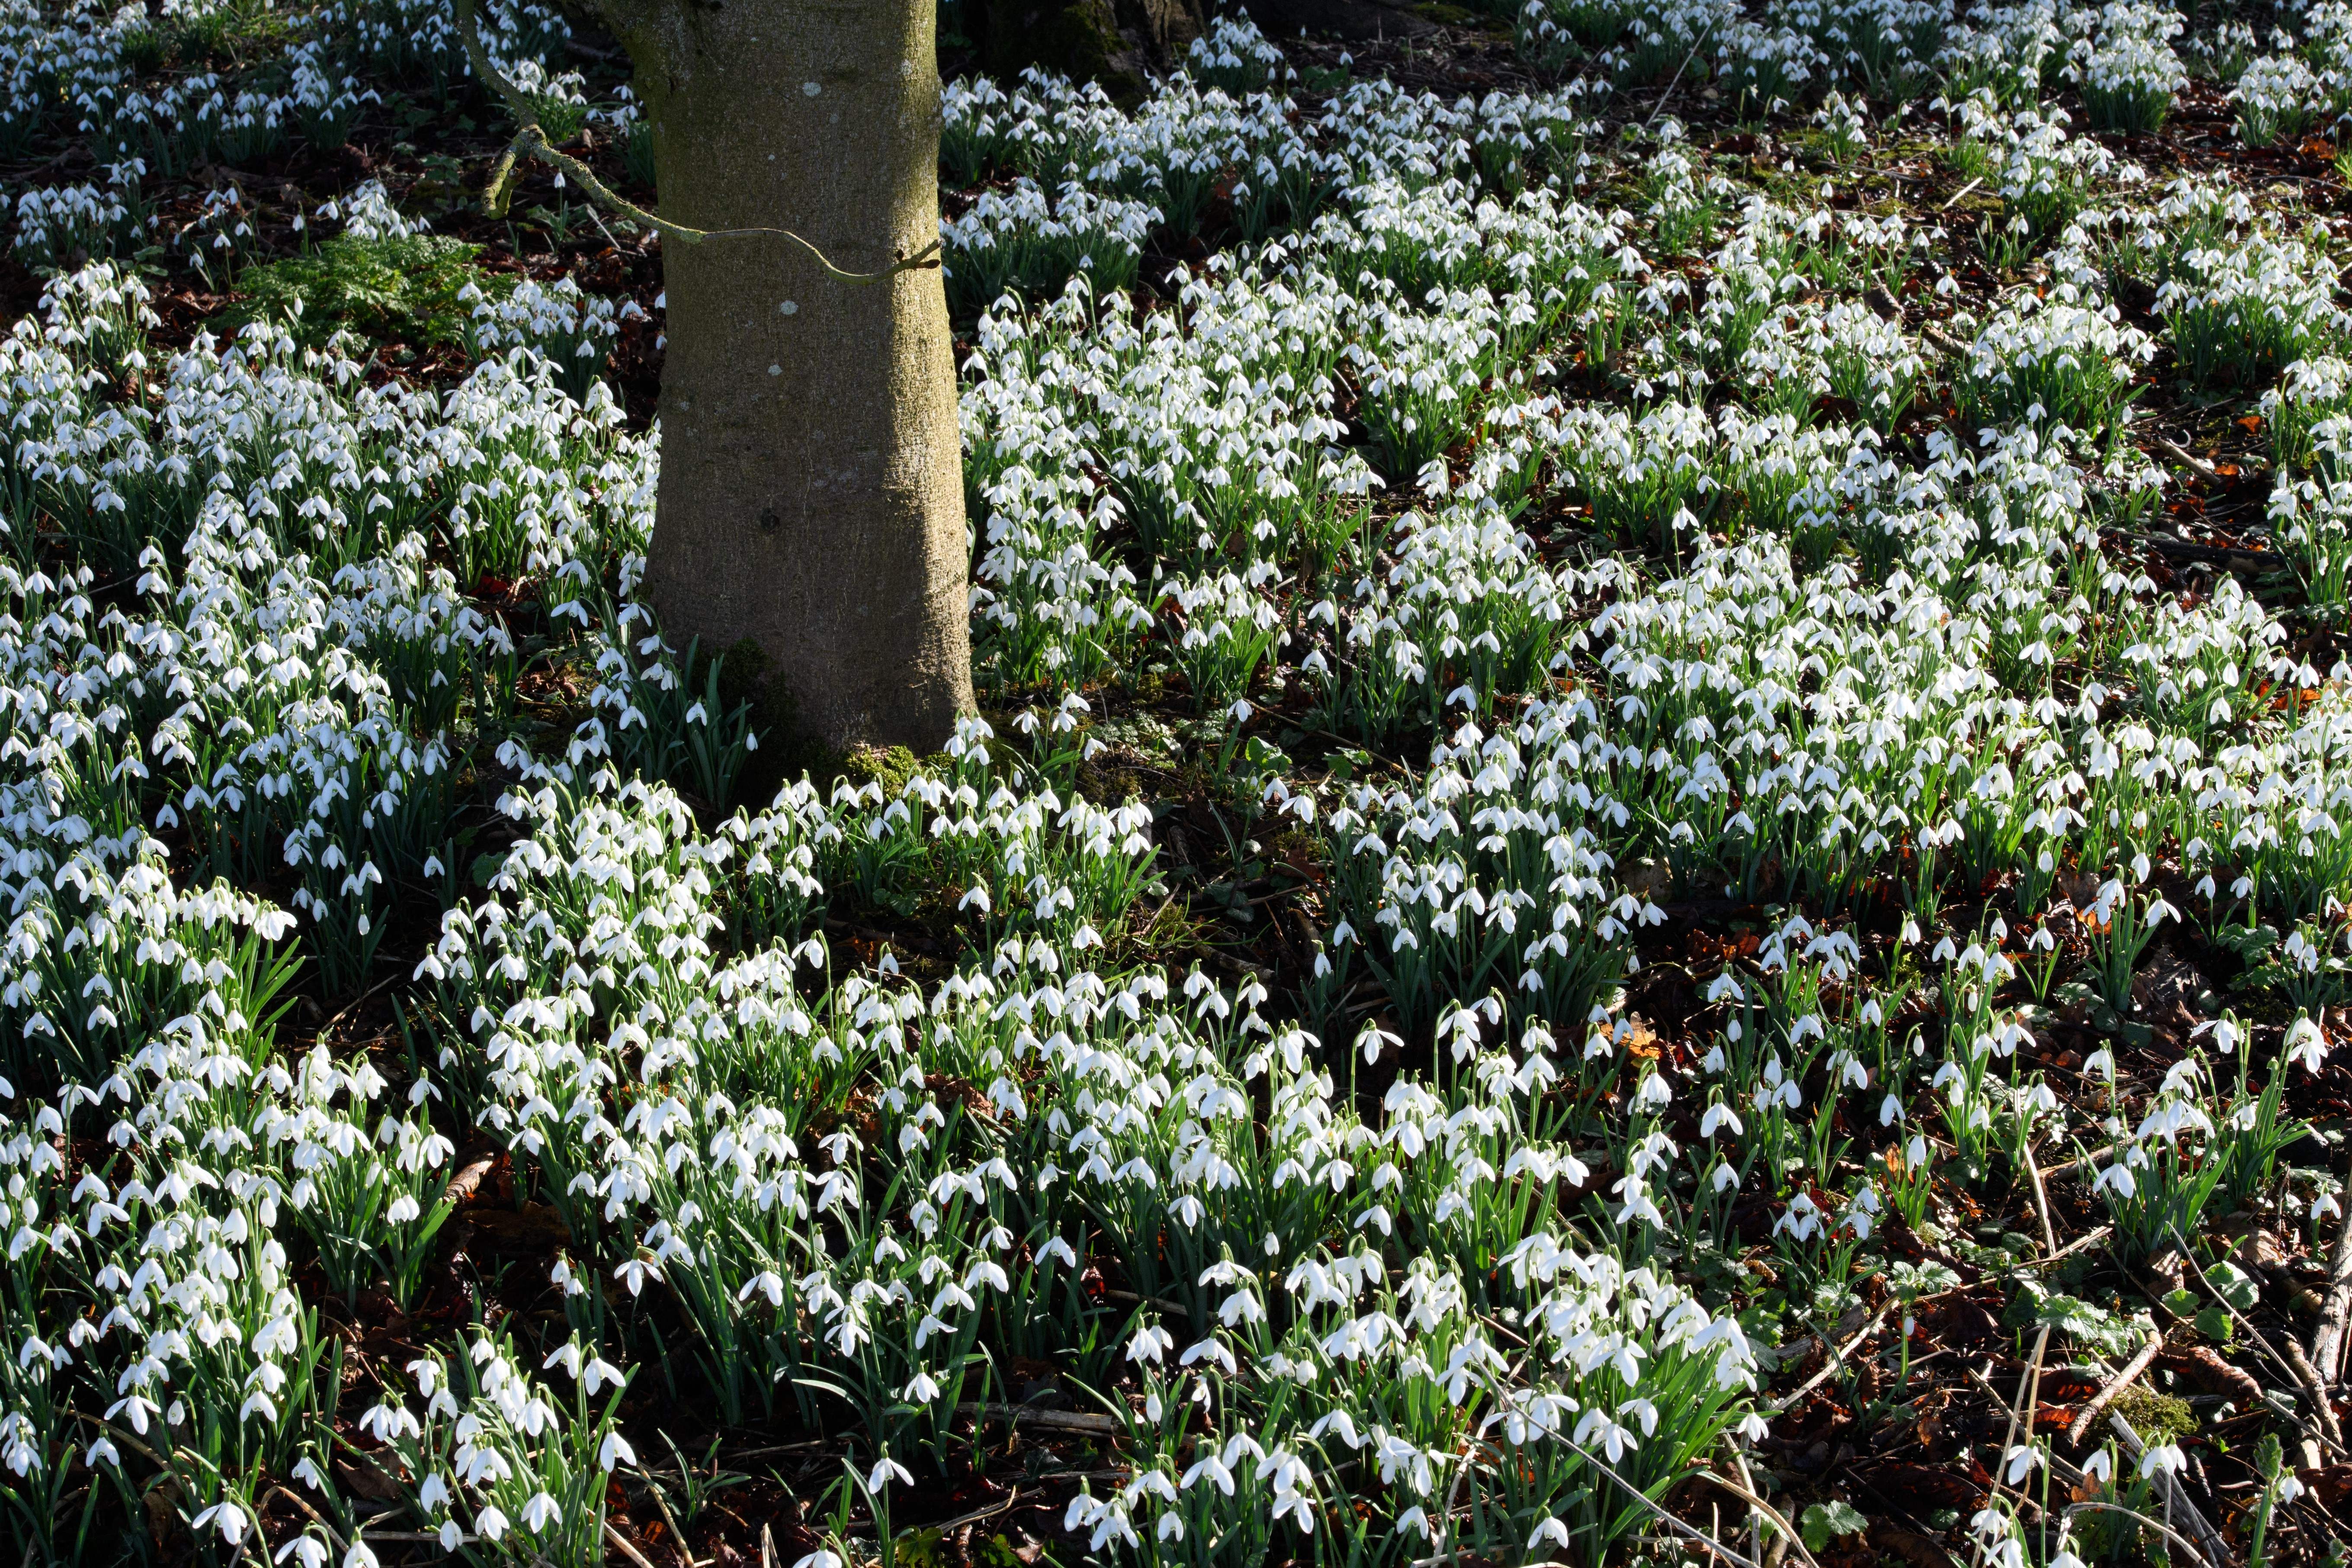 A carpet of snowdrops in the grounds of Burton Agnes Hall, near Bridlington, Yorkshire